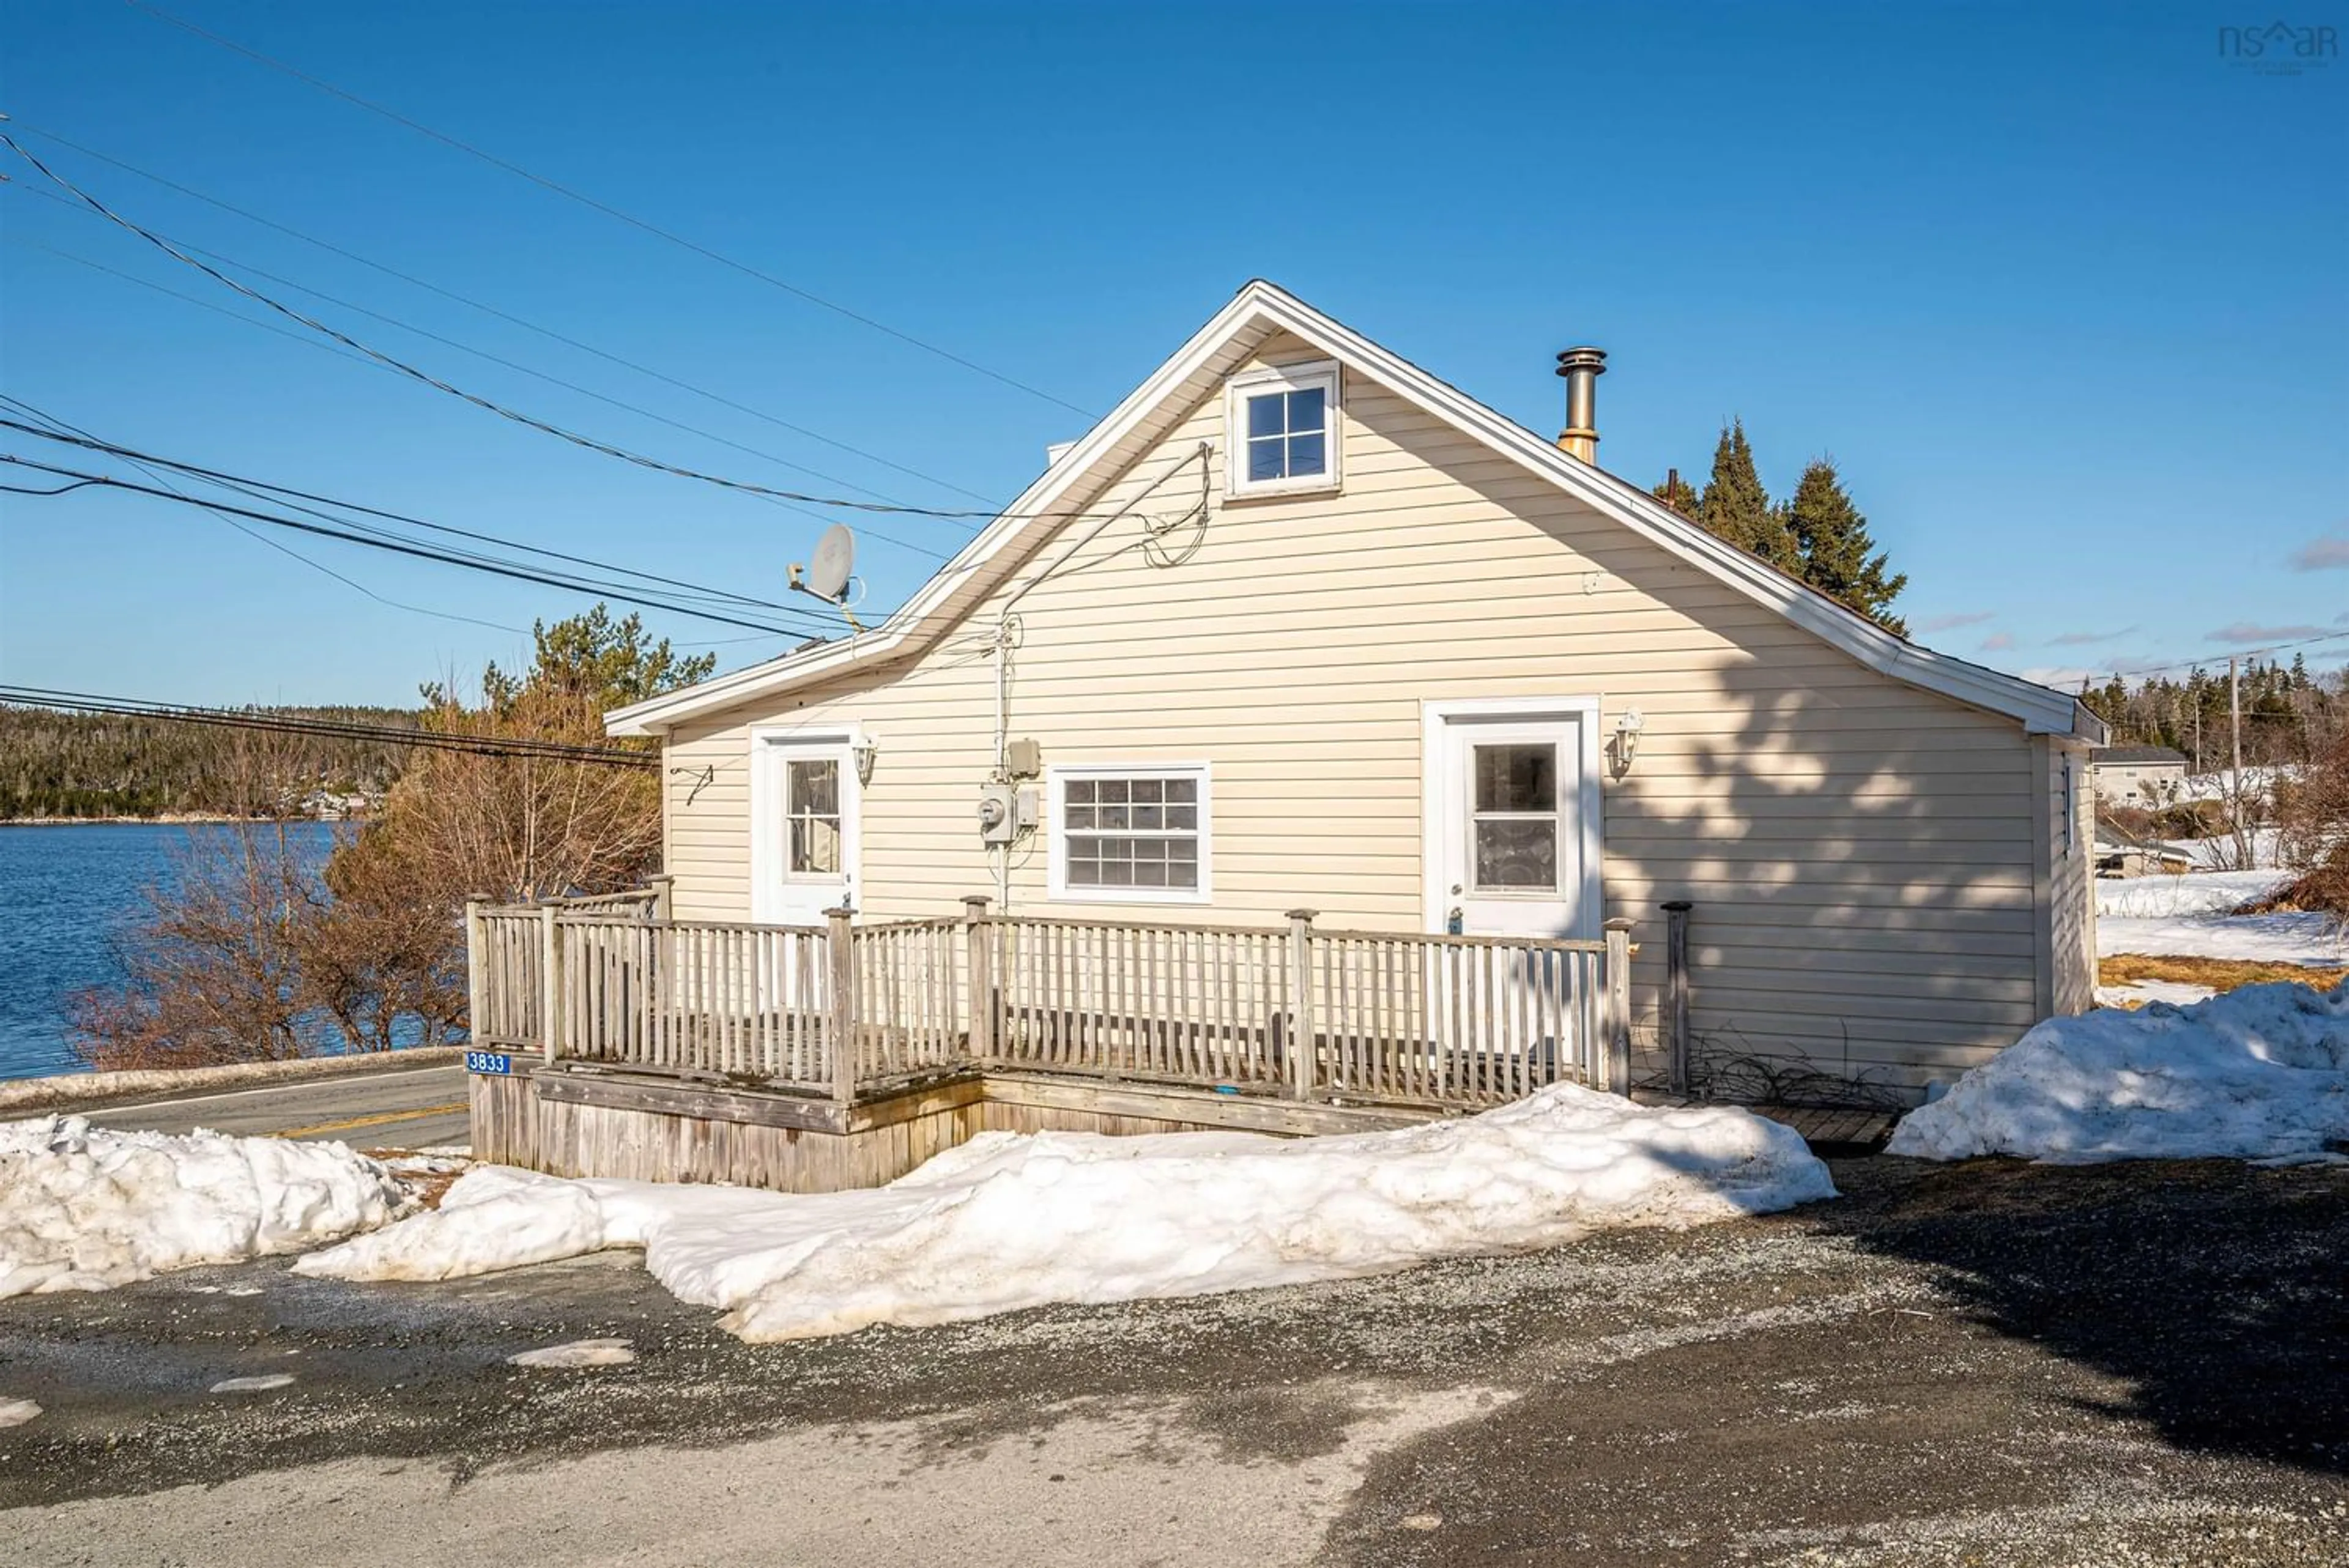 Home with unknown exterior material for 3833 Prospect Rd, Shad Bay Nova Scotia B3T 2B8